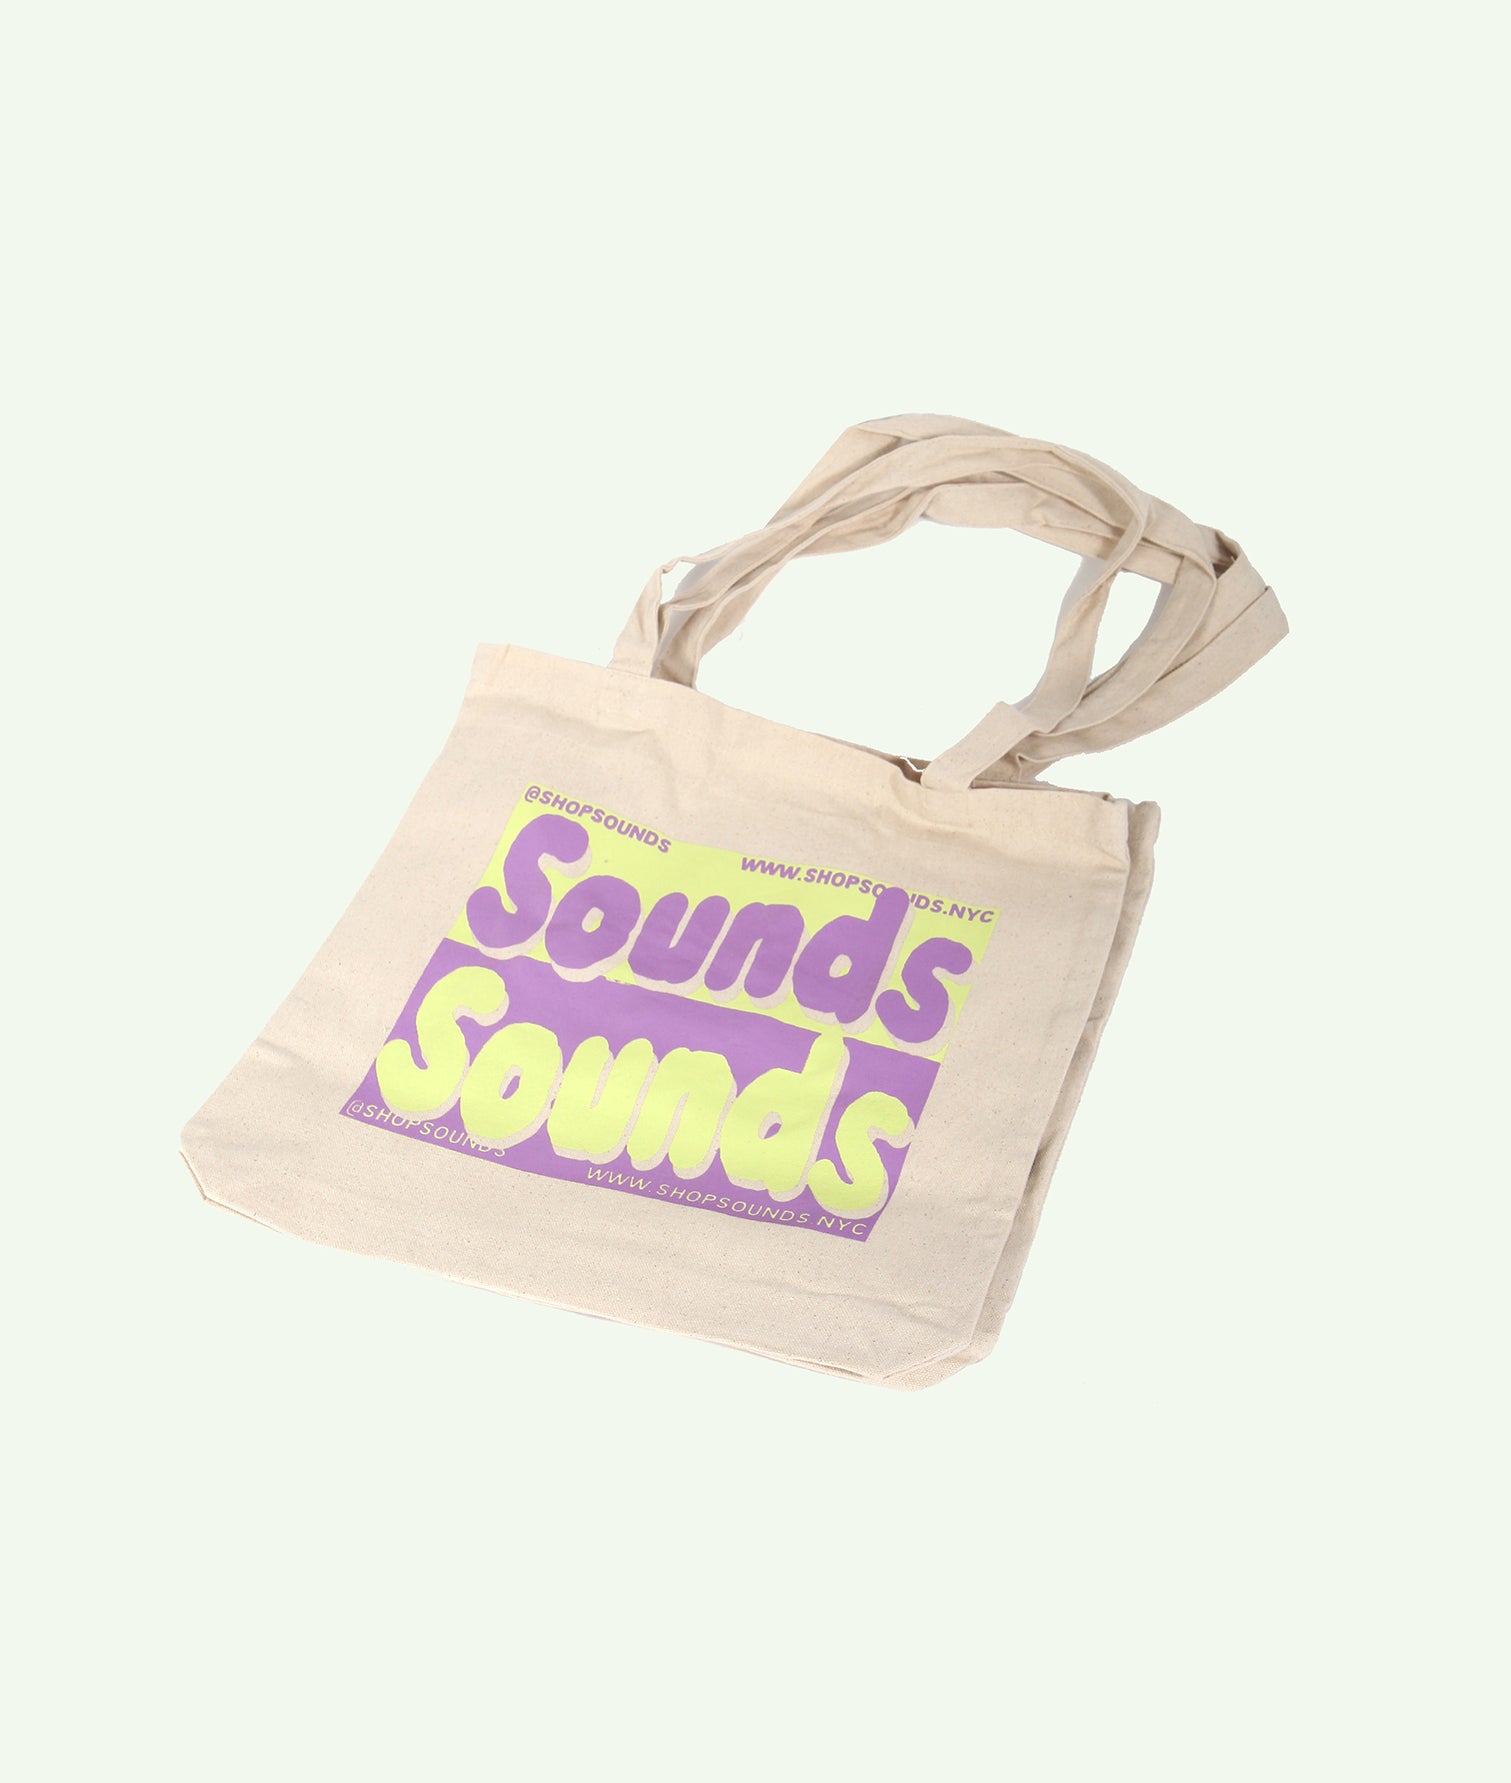 Sounds Tote